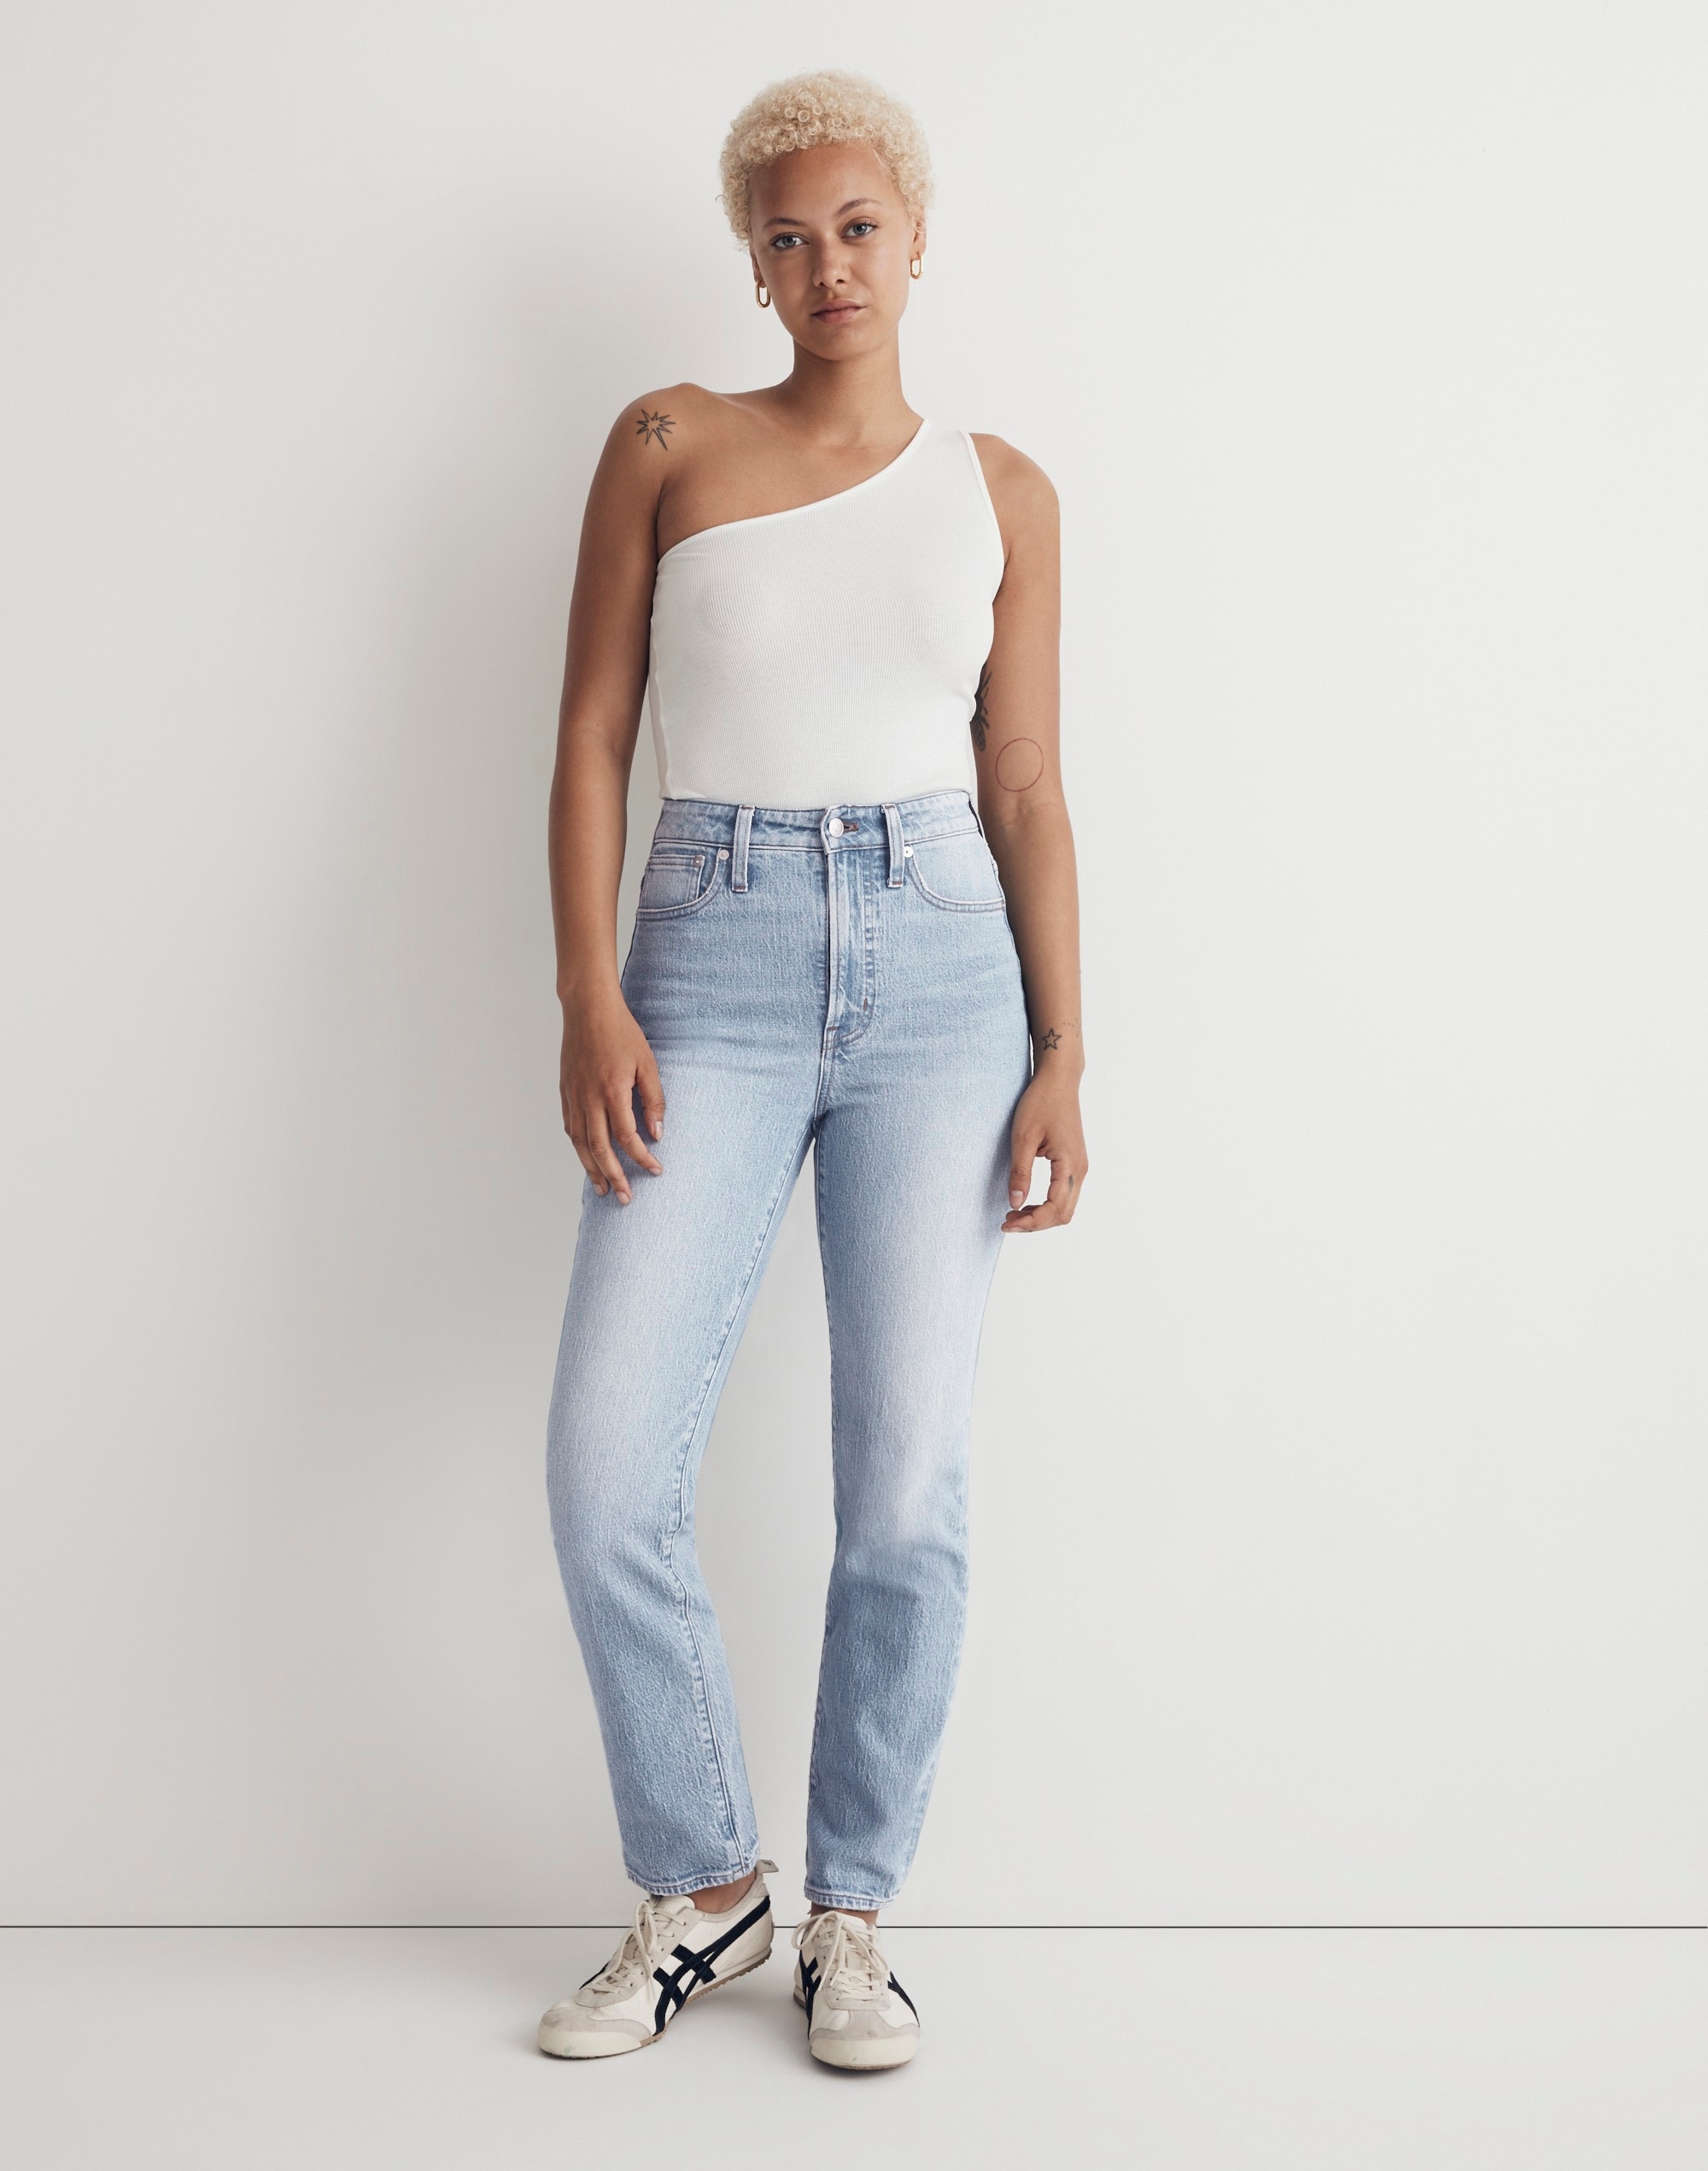 Women's Jeans, Size 24 to 44+